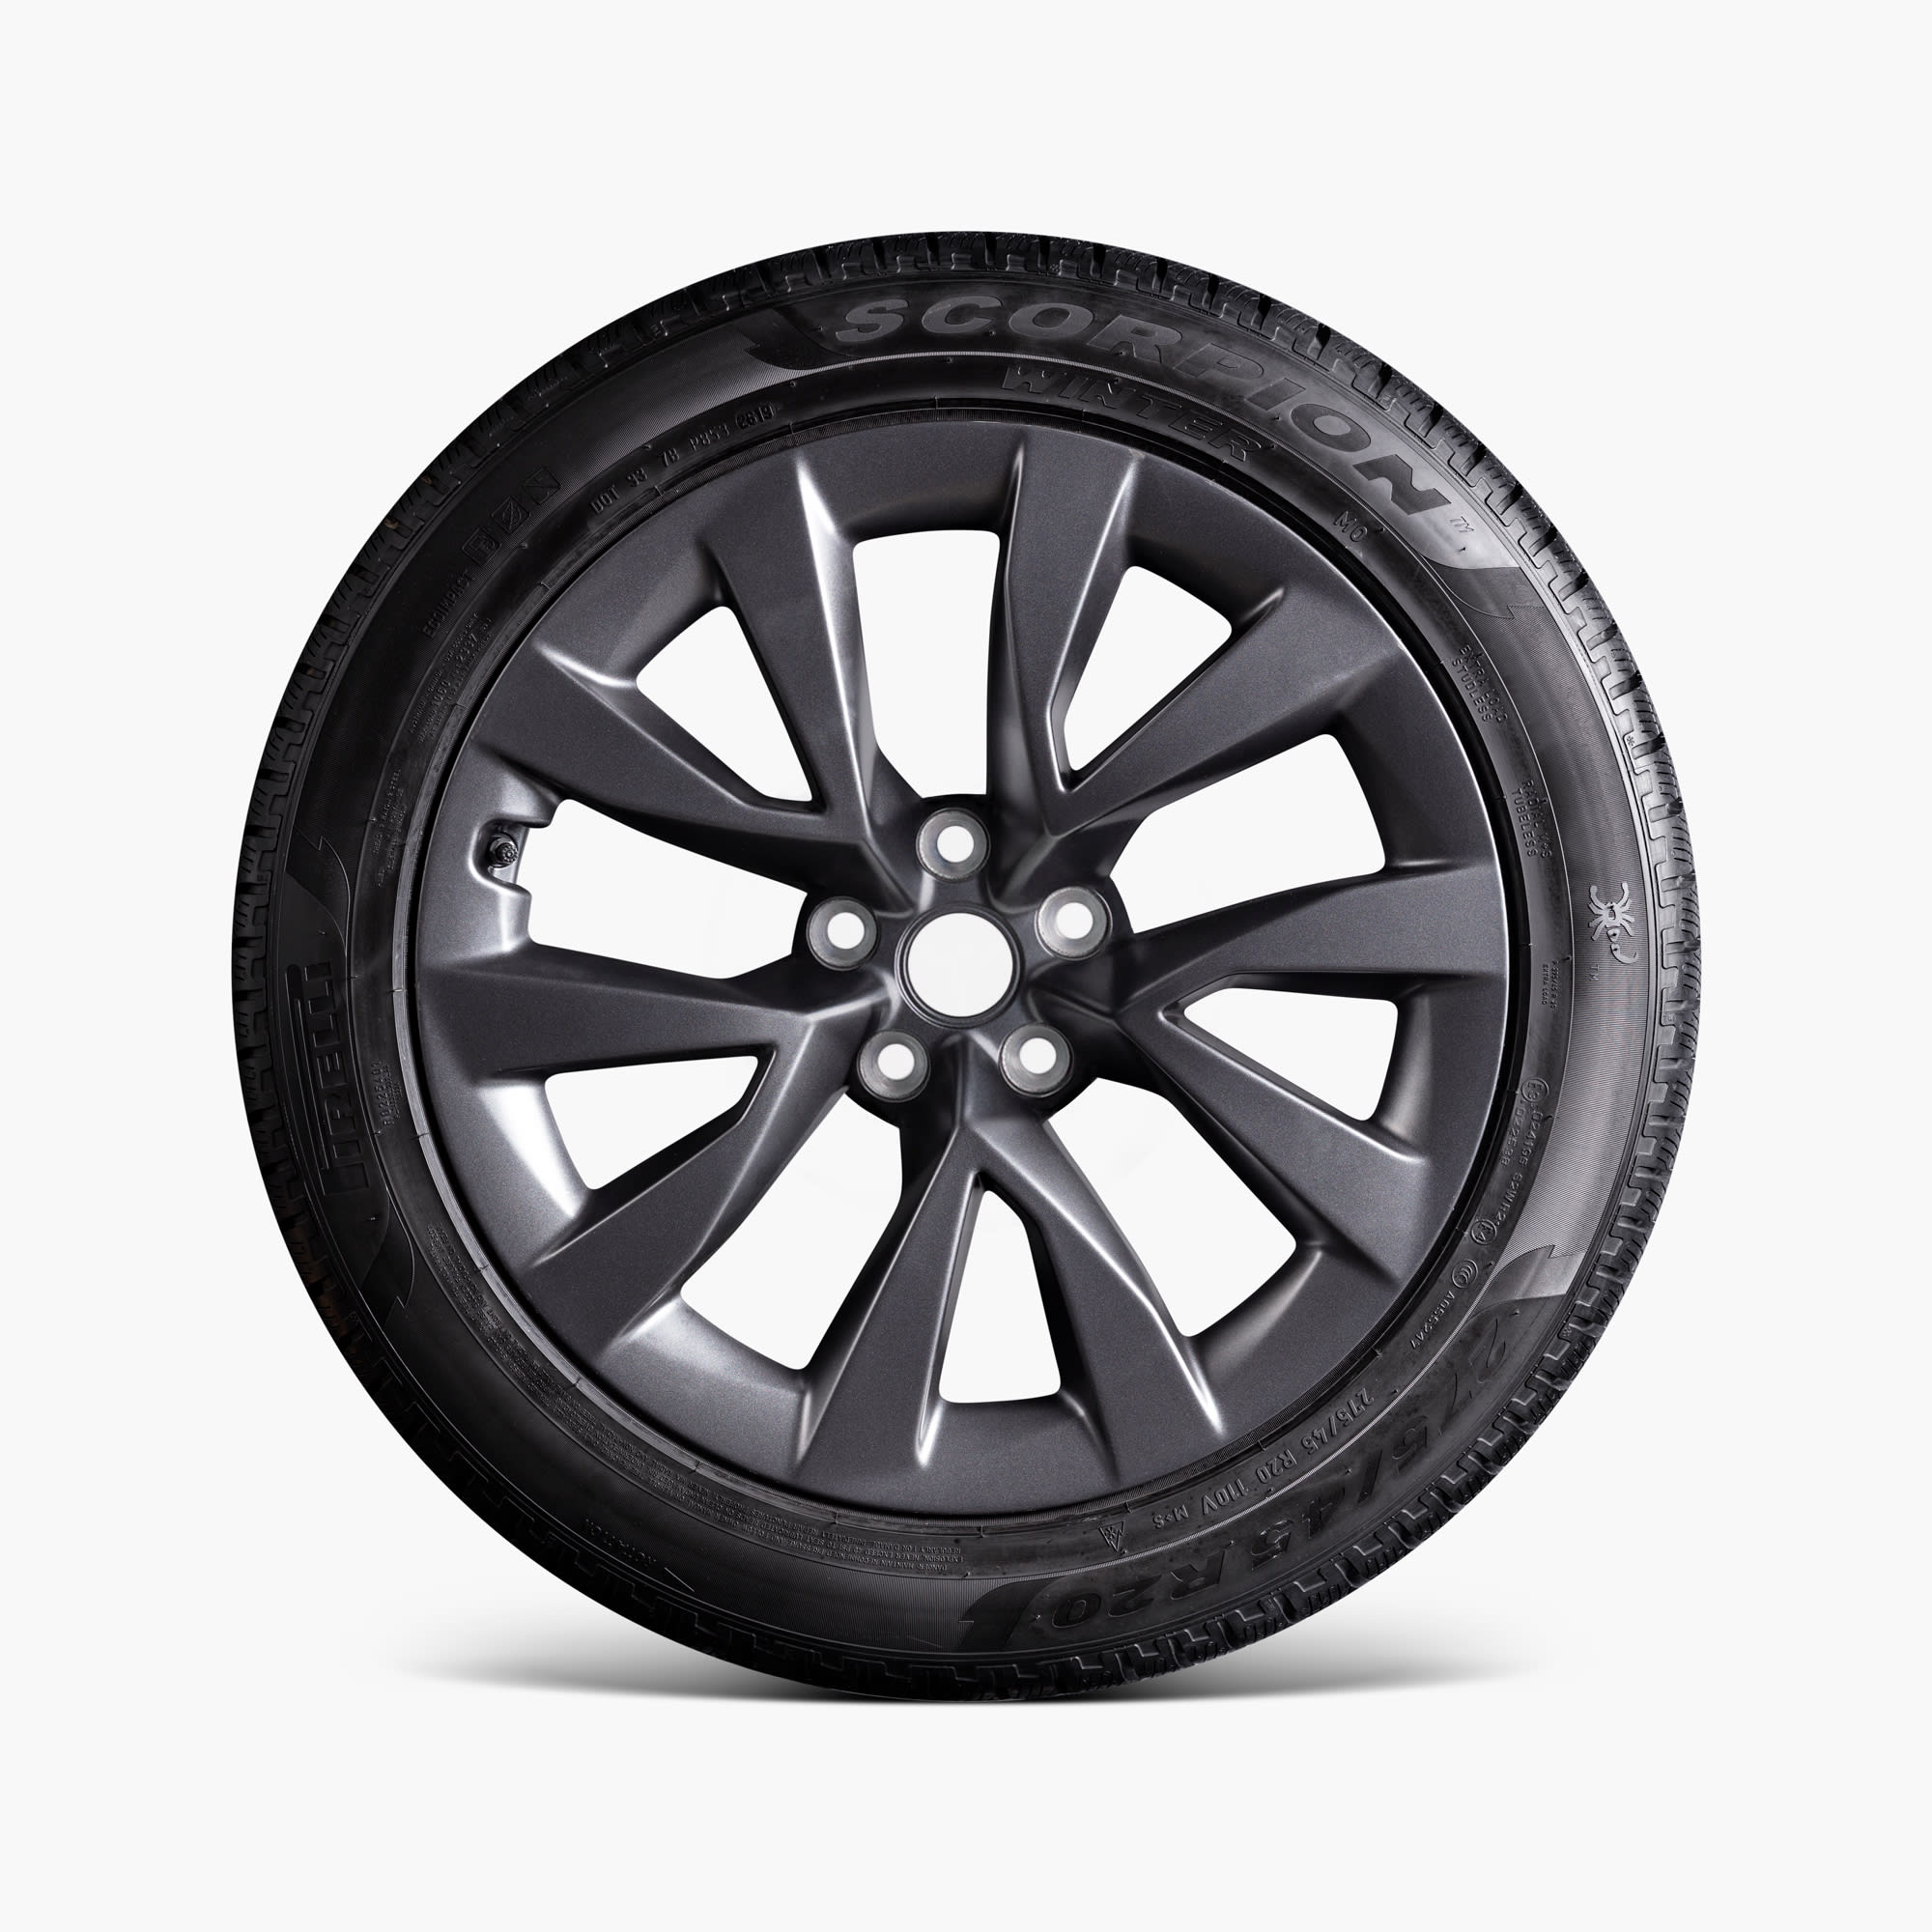 Model X 20" Cyberstream Wheel and Winter Tire Package